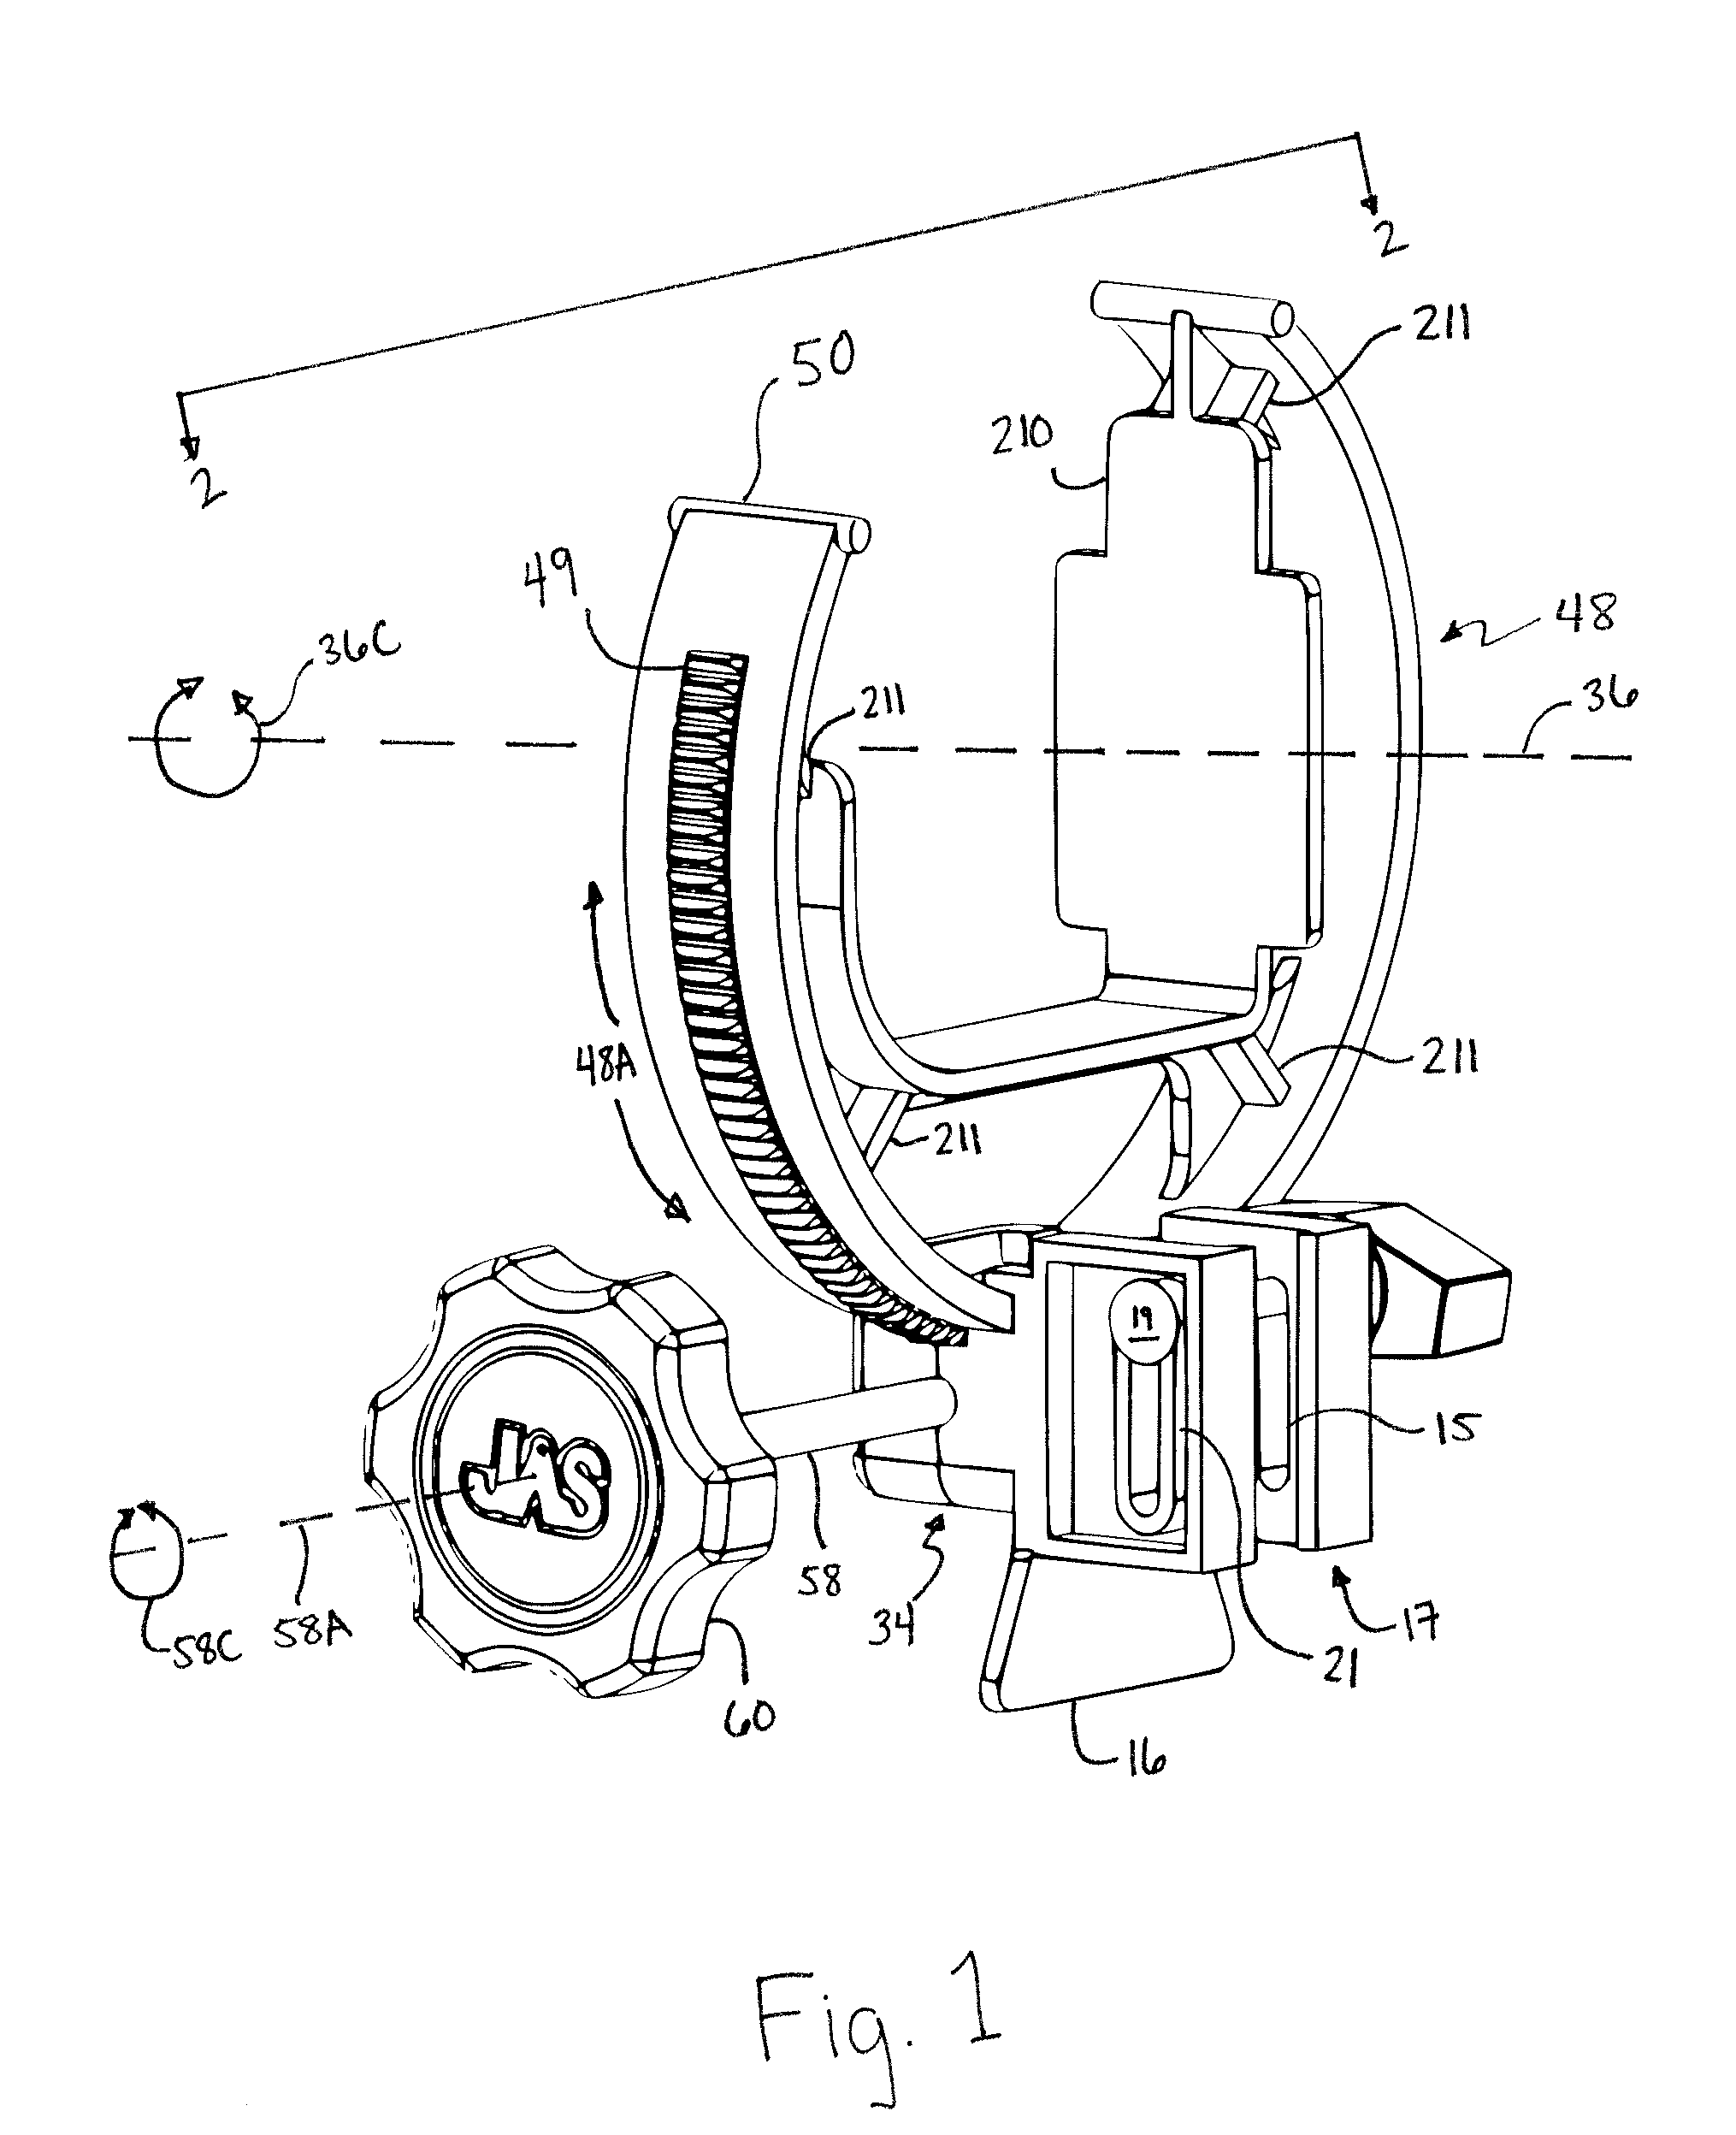 Orthosis Apparatus and Method of Using an Orthosis Apparatus